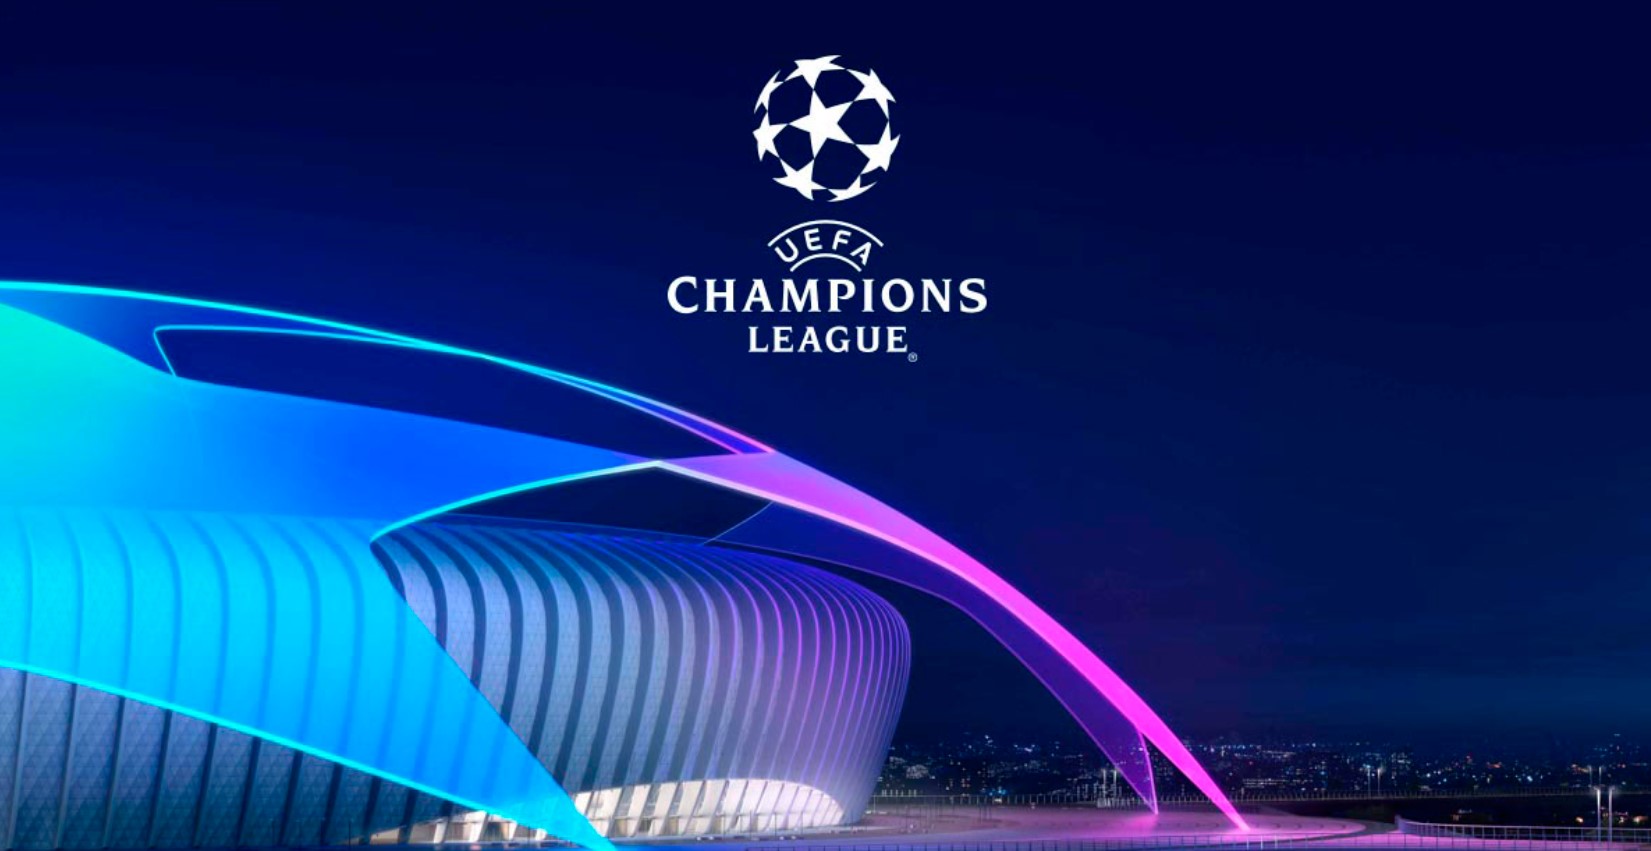 HOW TO WATCH THE CHAMPIONS LEAGUE FINAL ON STREAMING